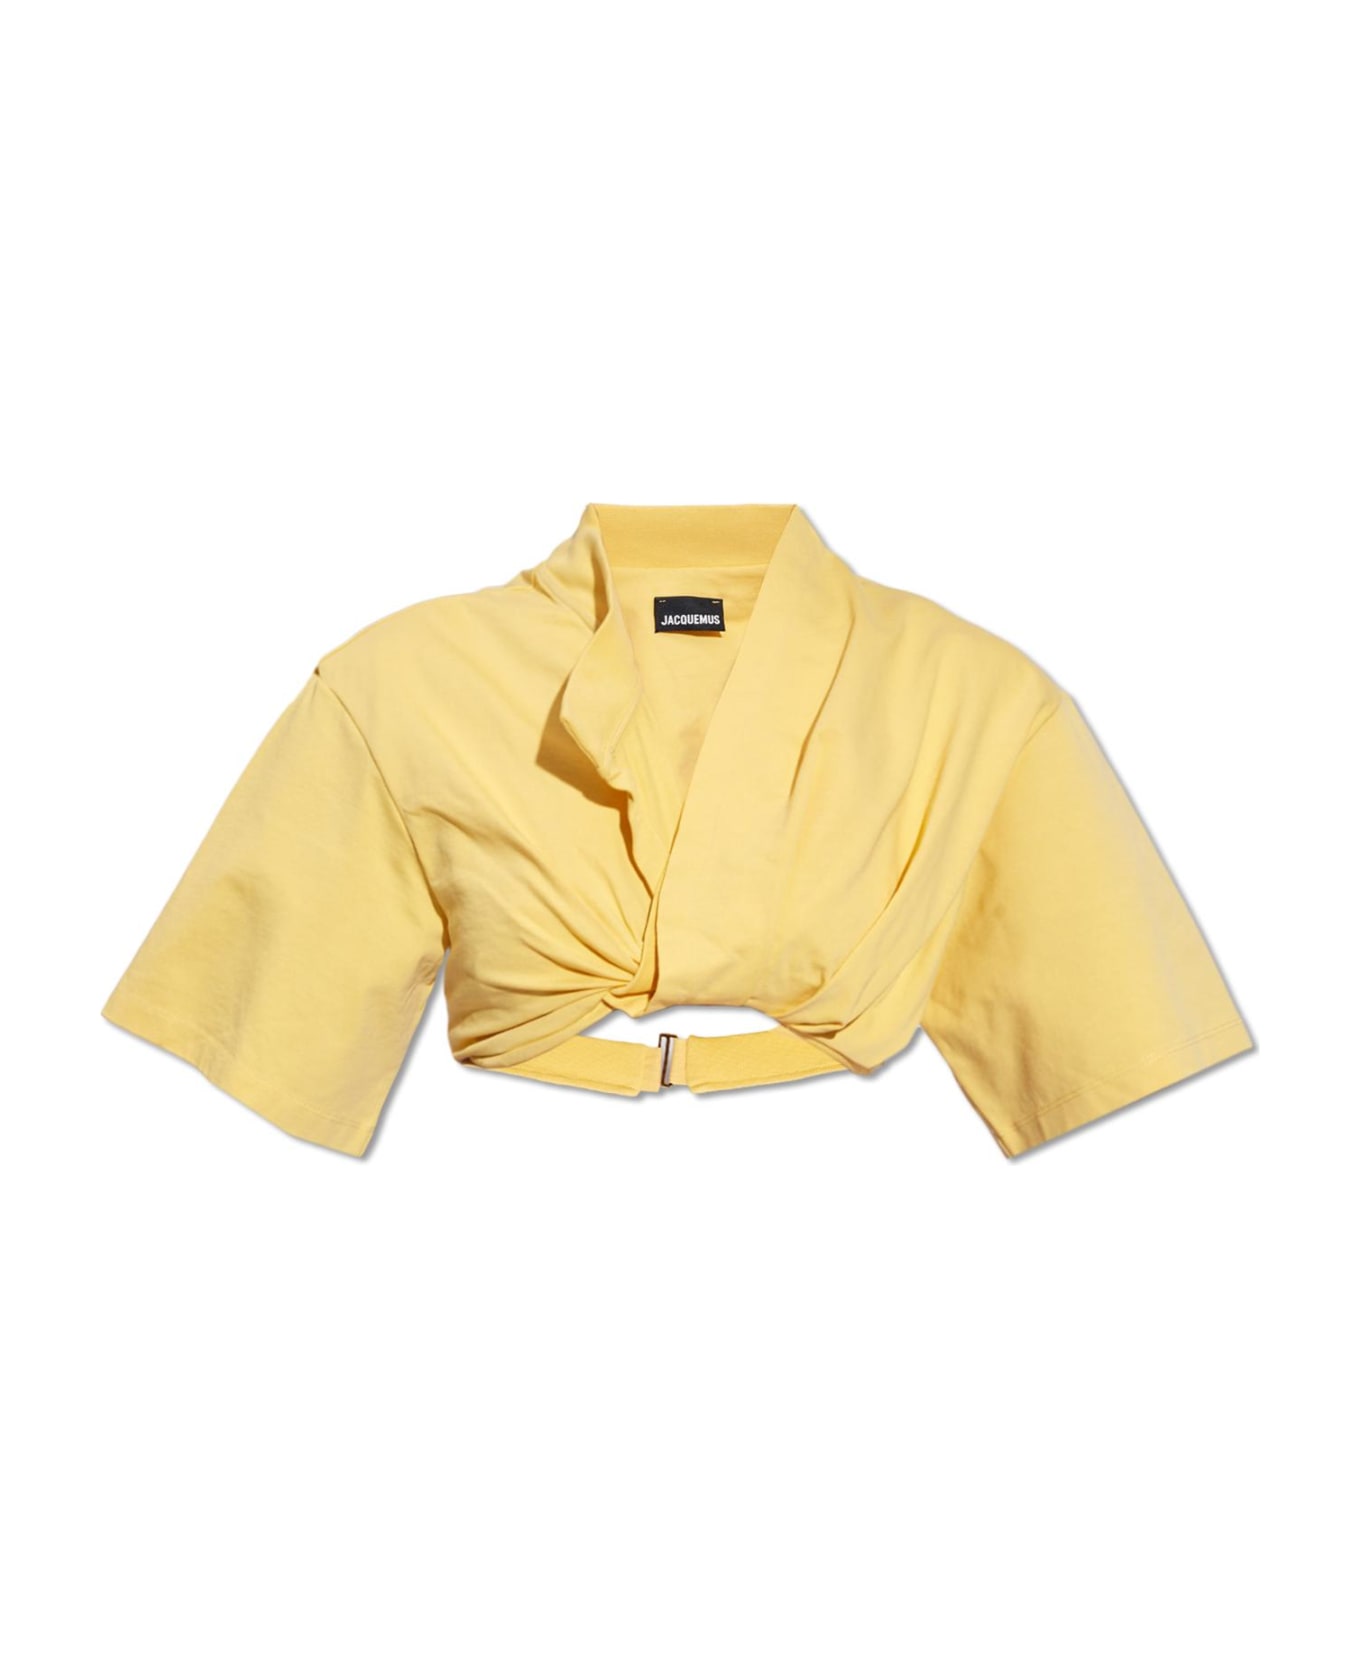 Jacquemus Cropped Top - YELLOW